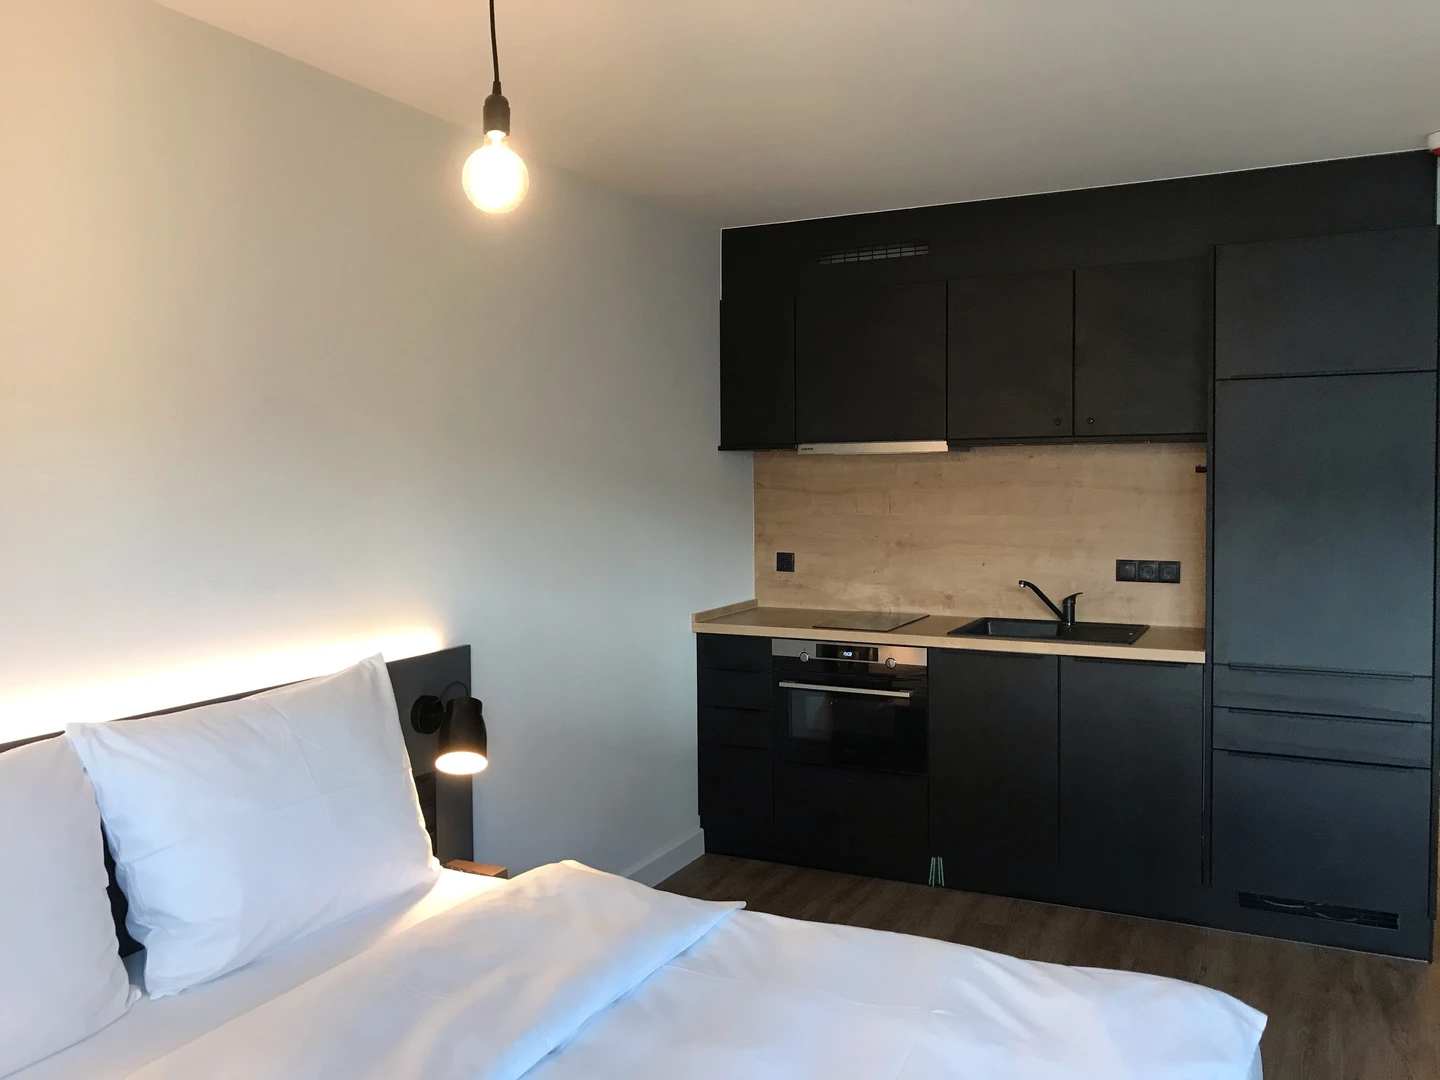 Renting rooms by the month in wiesbaden